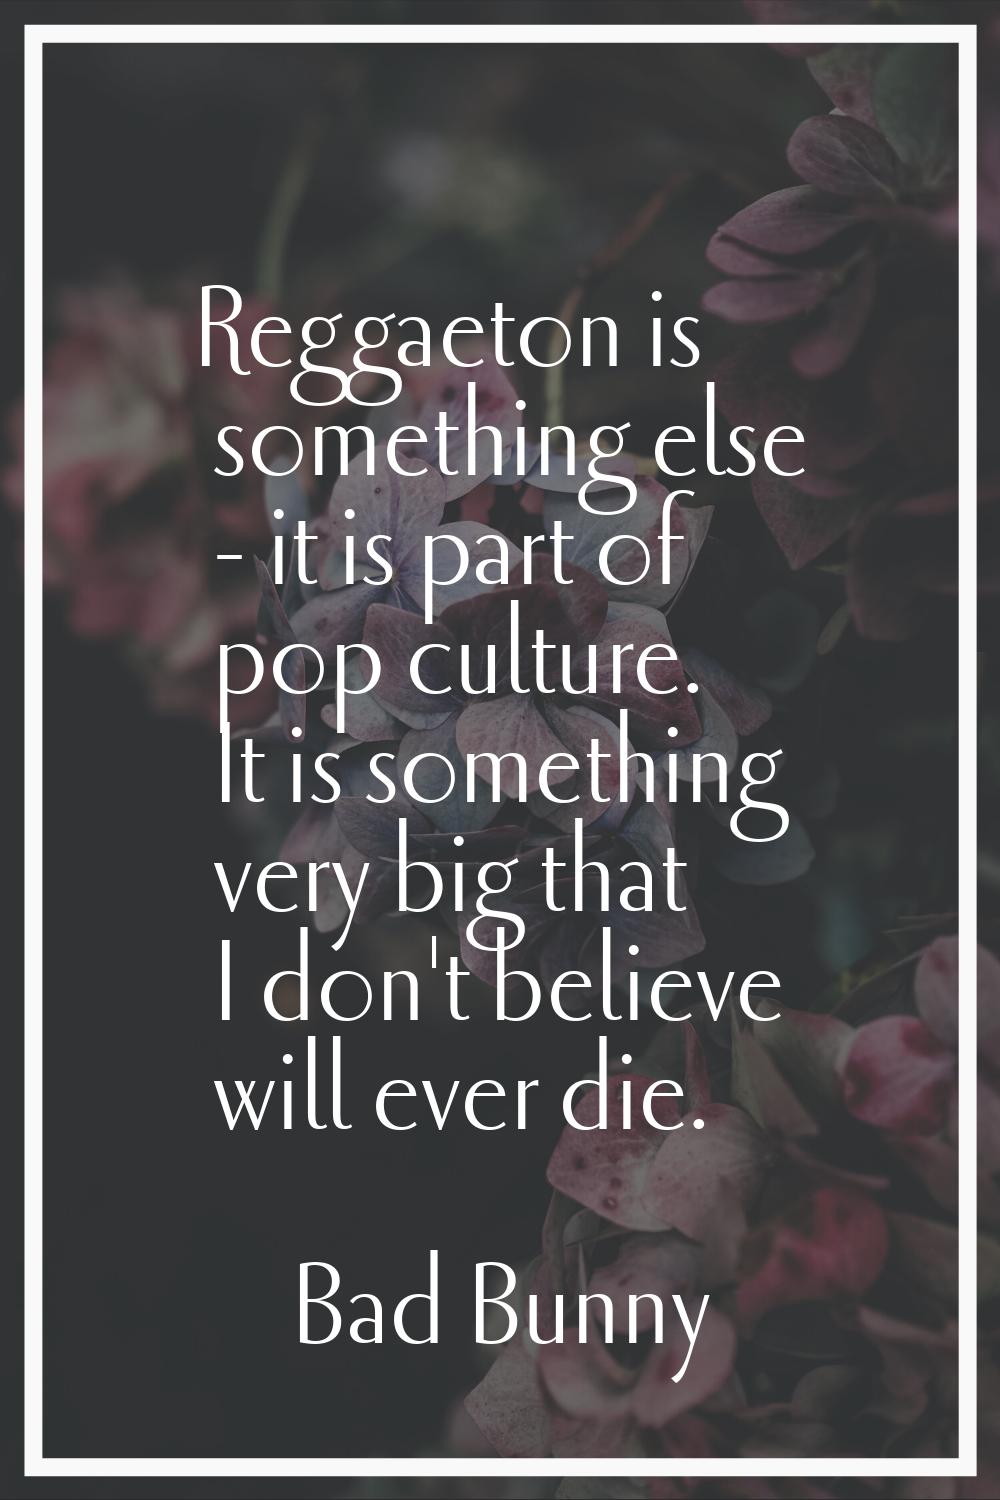 Reggaeton is something else - it is part of pop culture. It is something very big that I don't beli